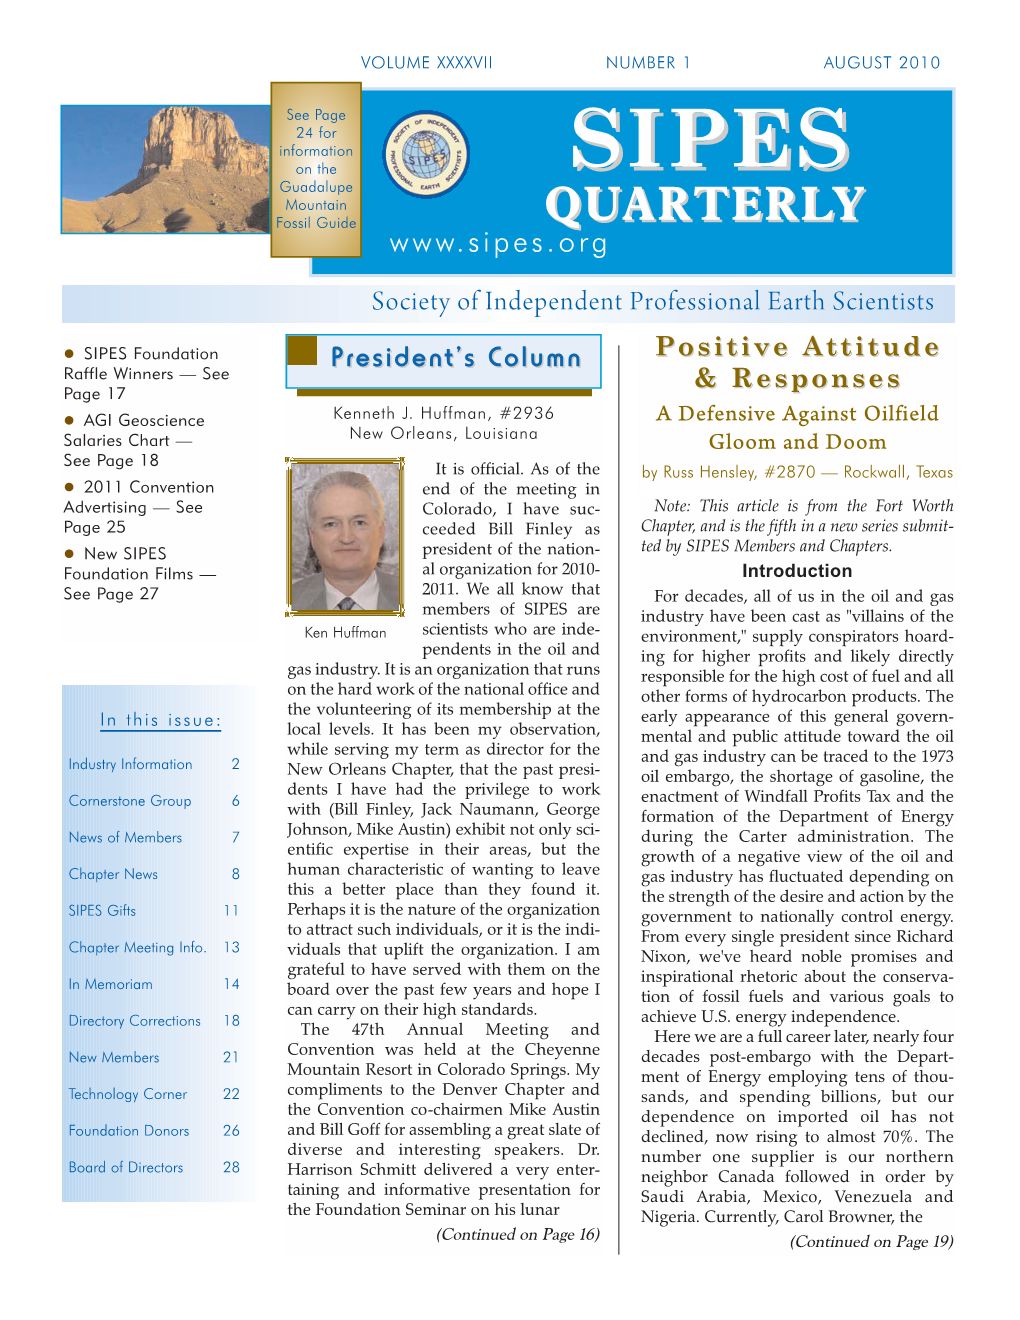 Quarterly Is Published by the Flint Hills Refinery in Corpus Christi